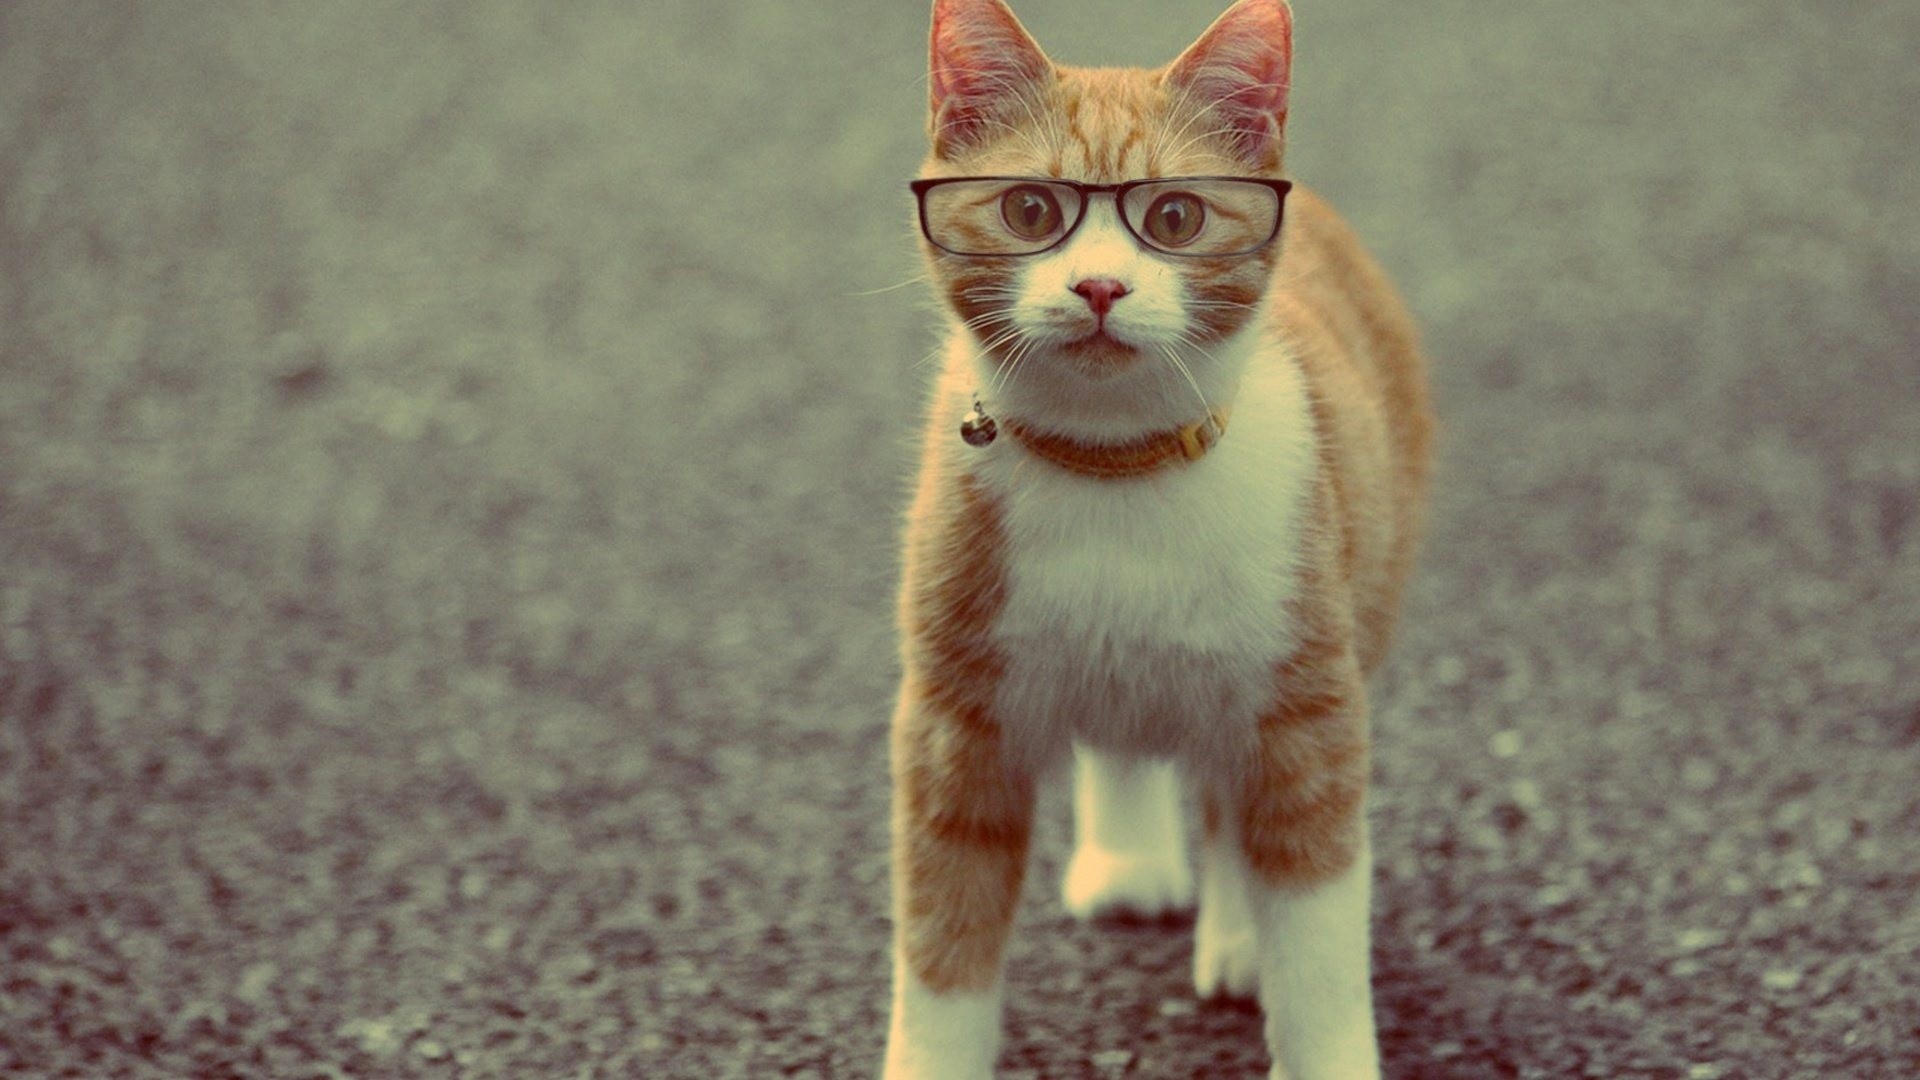 1920x1080 Cool Dog With Sunglasses | Dogs, cats and other critters with glasses |  Pinterest | Dog cat